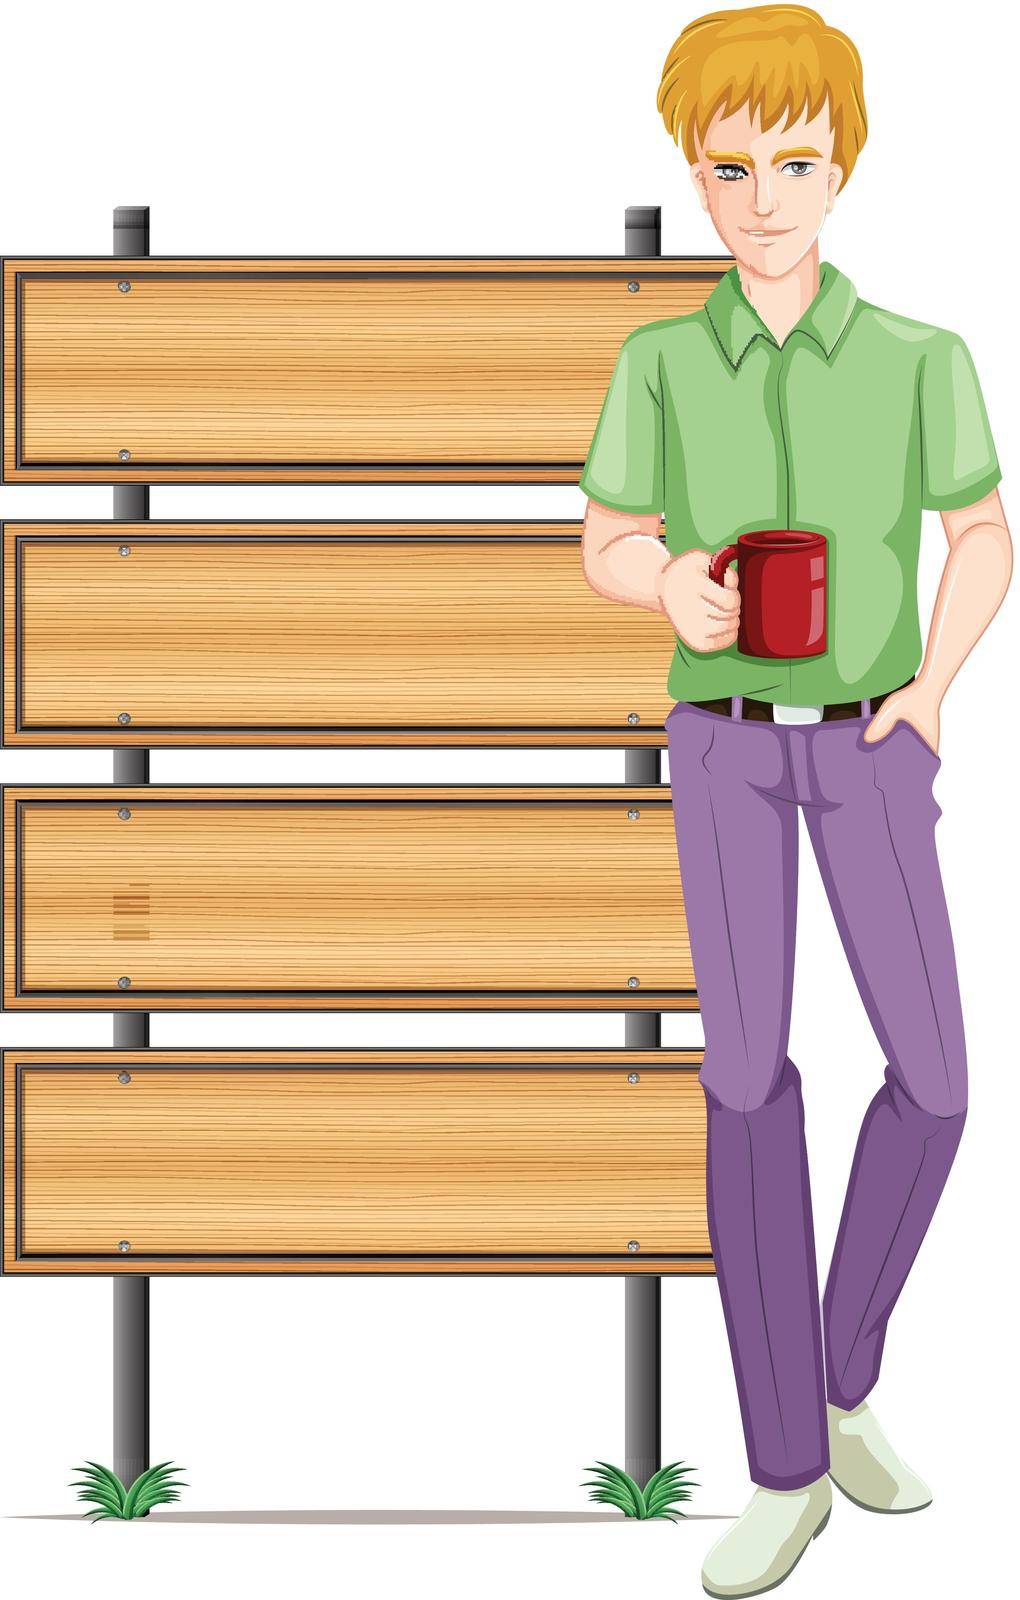 Man with coffee mug and wooden signs illustration